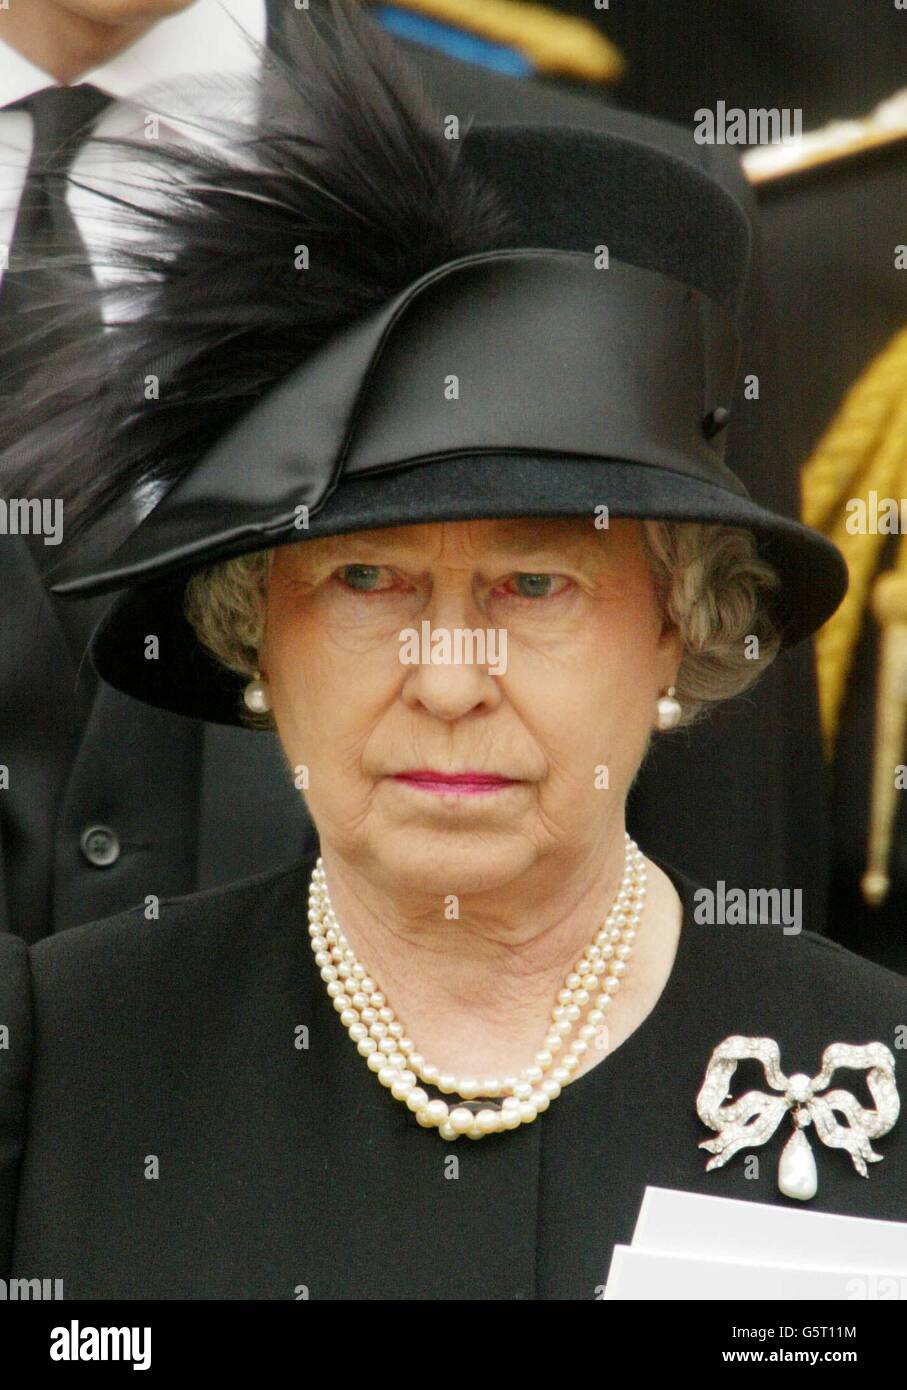 The Queen leaves Westminster Abbey following the funeral of the Queen Mother in central London. Royal dignitaries and politicians from around the world have gathered at Westminster Abbey to pay their respects to the Queen Mother who died aged 101. * She will be interred at St. George's Chapel in Windsor next to her husband King George VI. Stock Photo